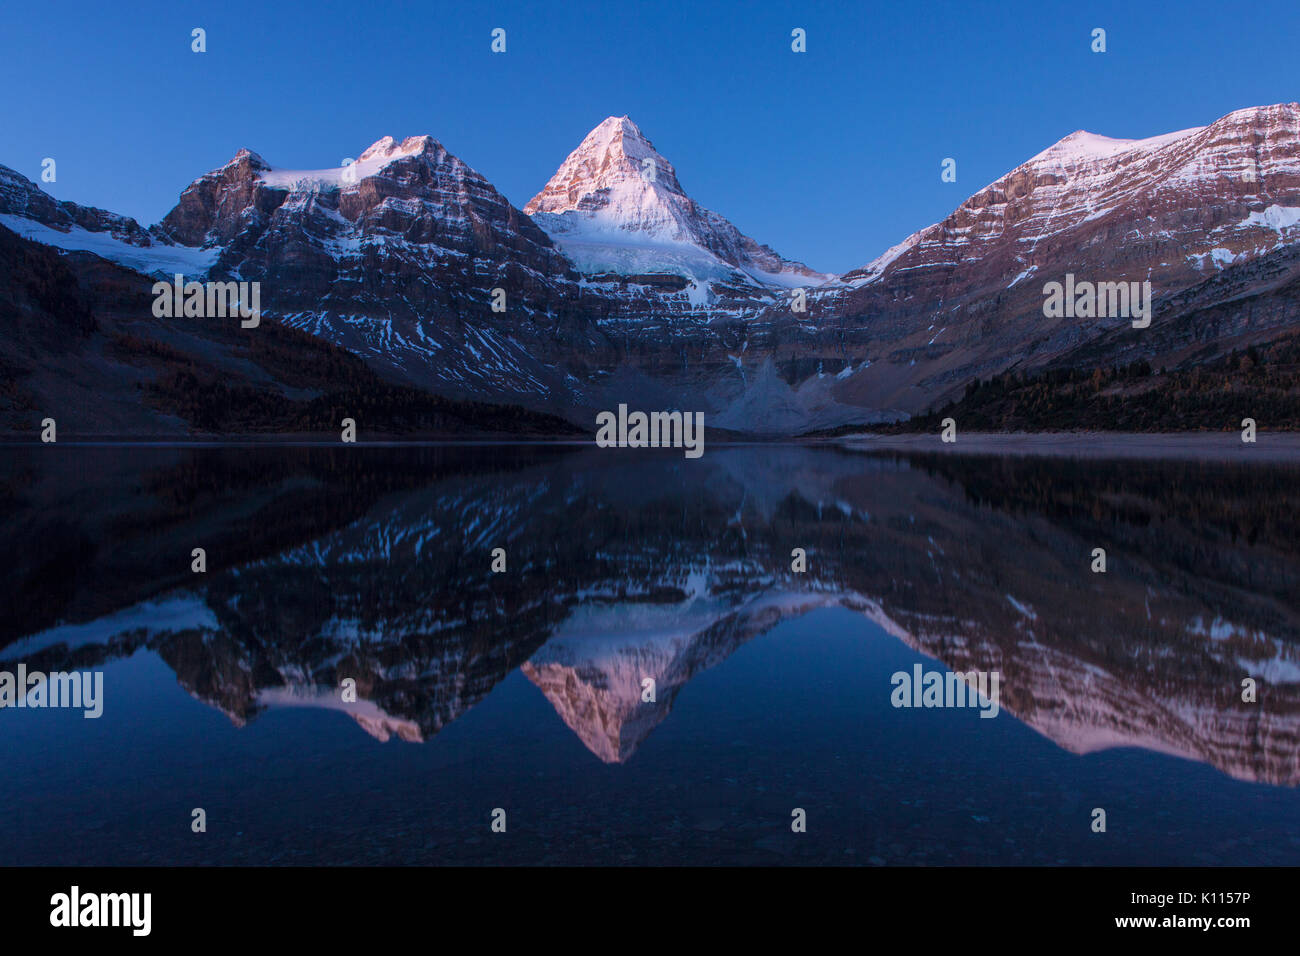 A star-filled sky over Mount Assiniboine reflected in Lake Magon, Mount Assiniboine Provincial Park, British Columbia, Canada. Stock Photo